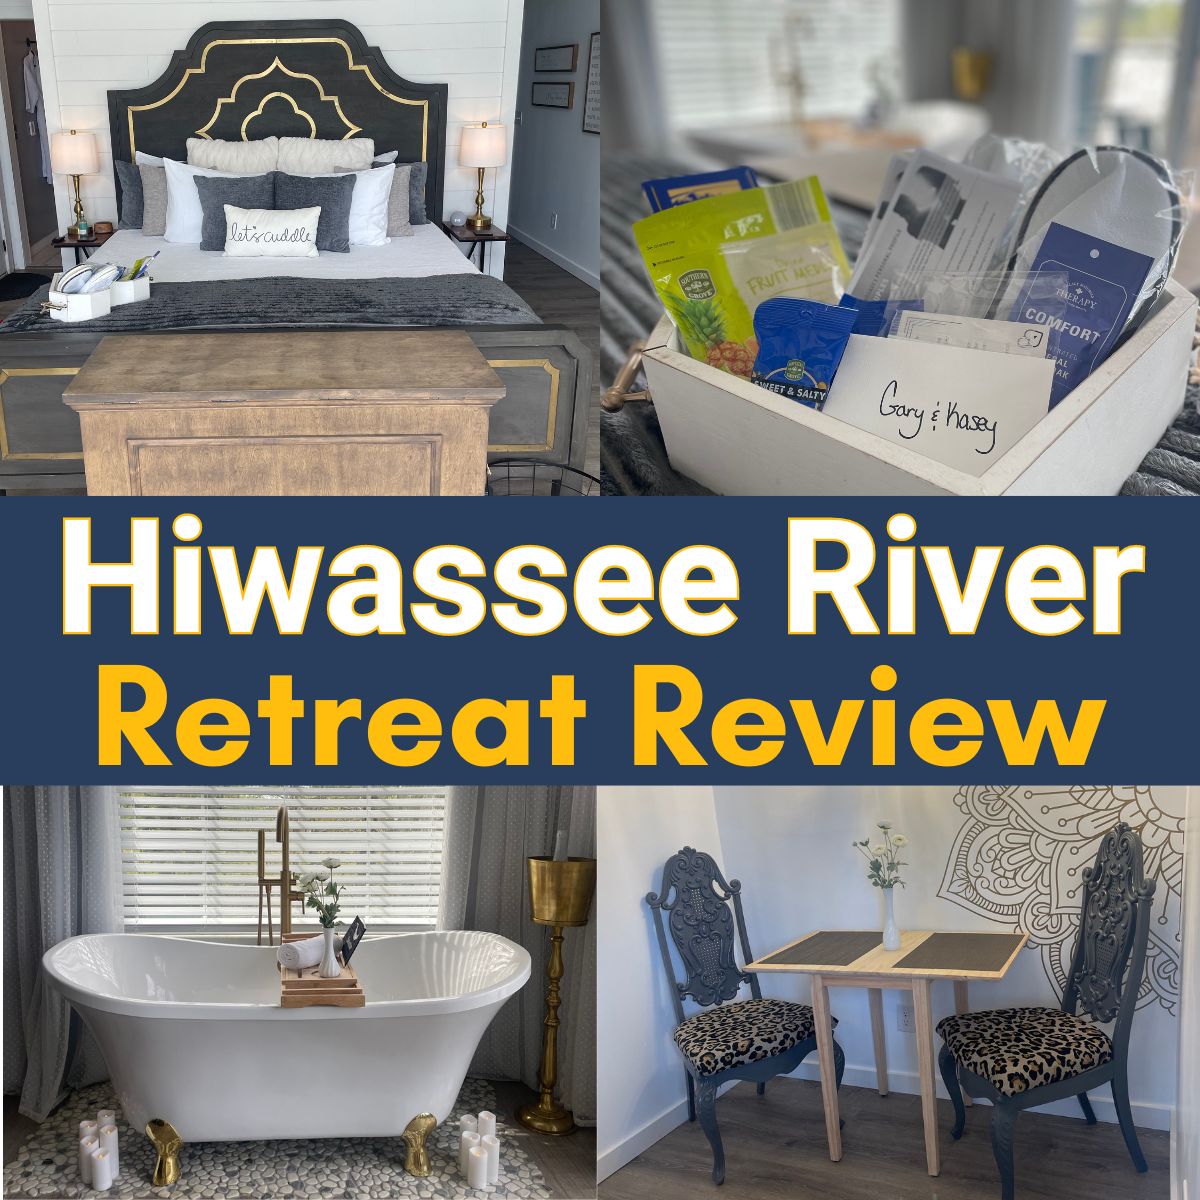 collage of four images showing pics of the interior of hiwassee river retreat - the bed, claw tub, table for two, and a heart gift basket